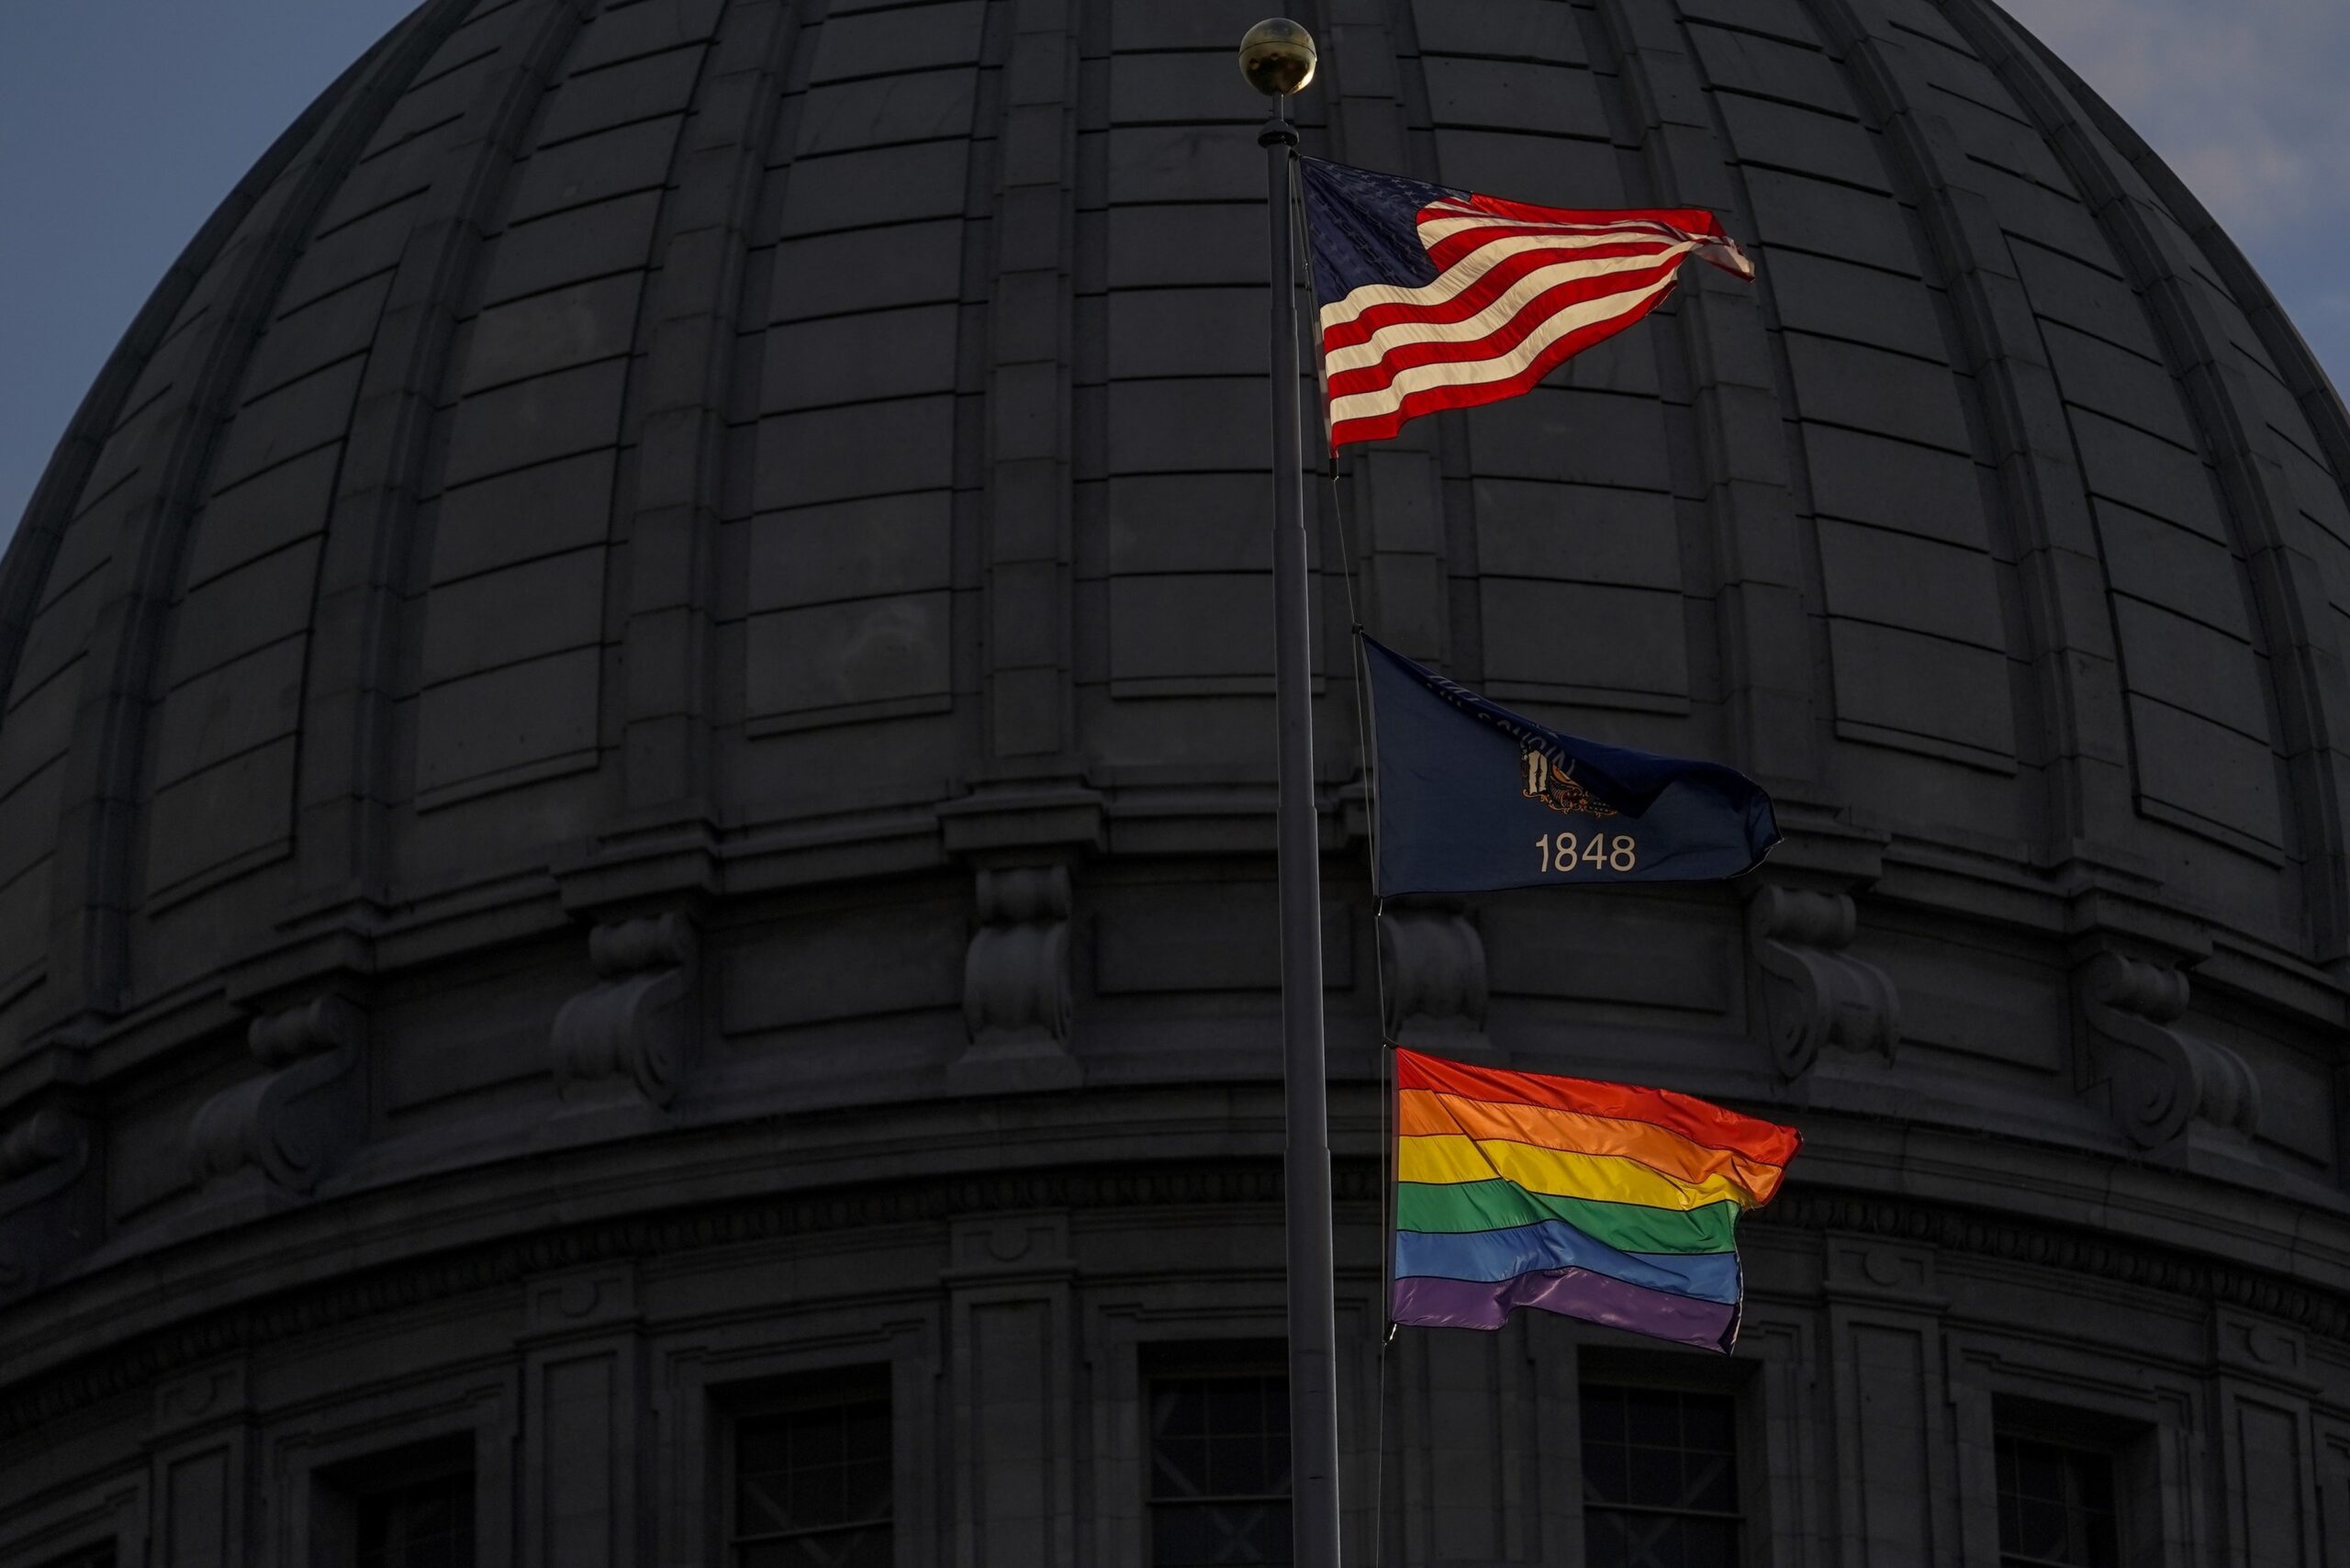 Wisconsin cities have taken steps to be more inclusive to the LGBTQ+ community